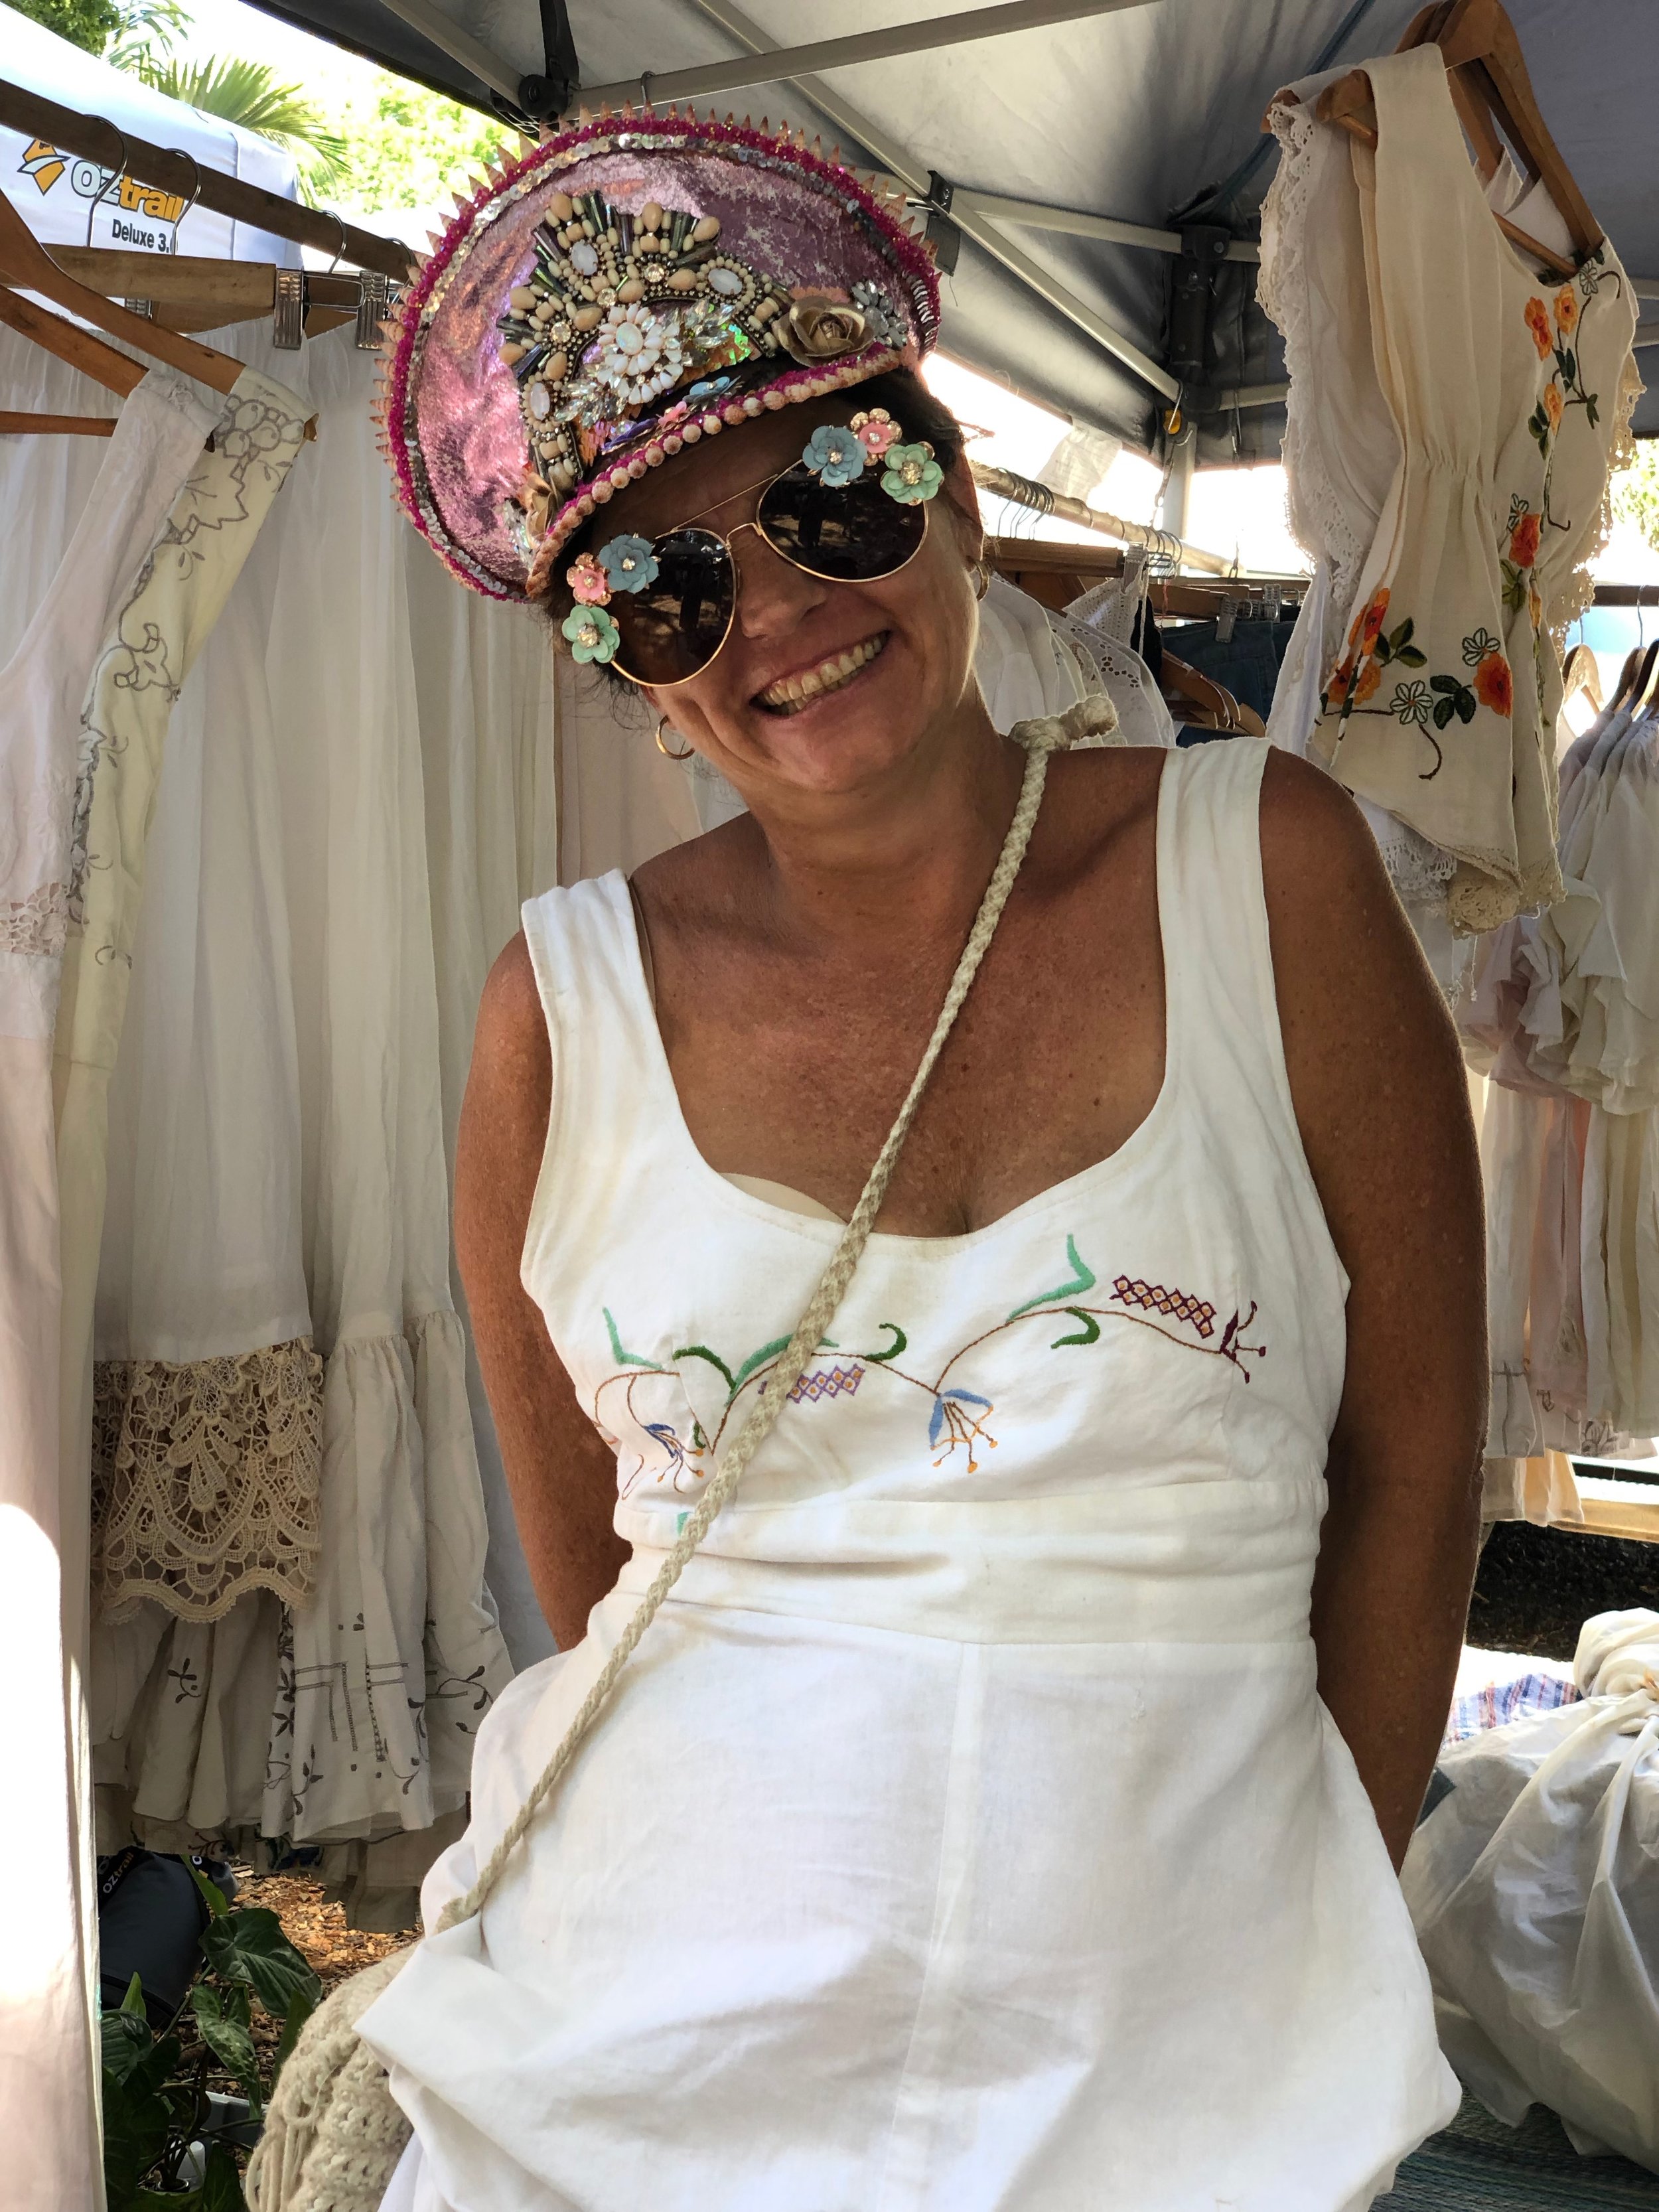 Bangalow Market is great for vintage